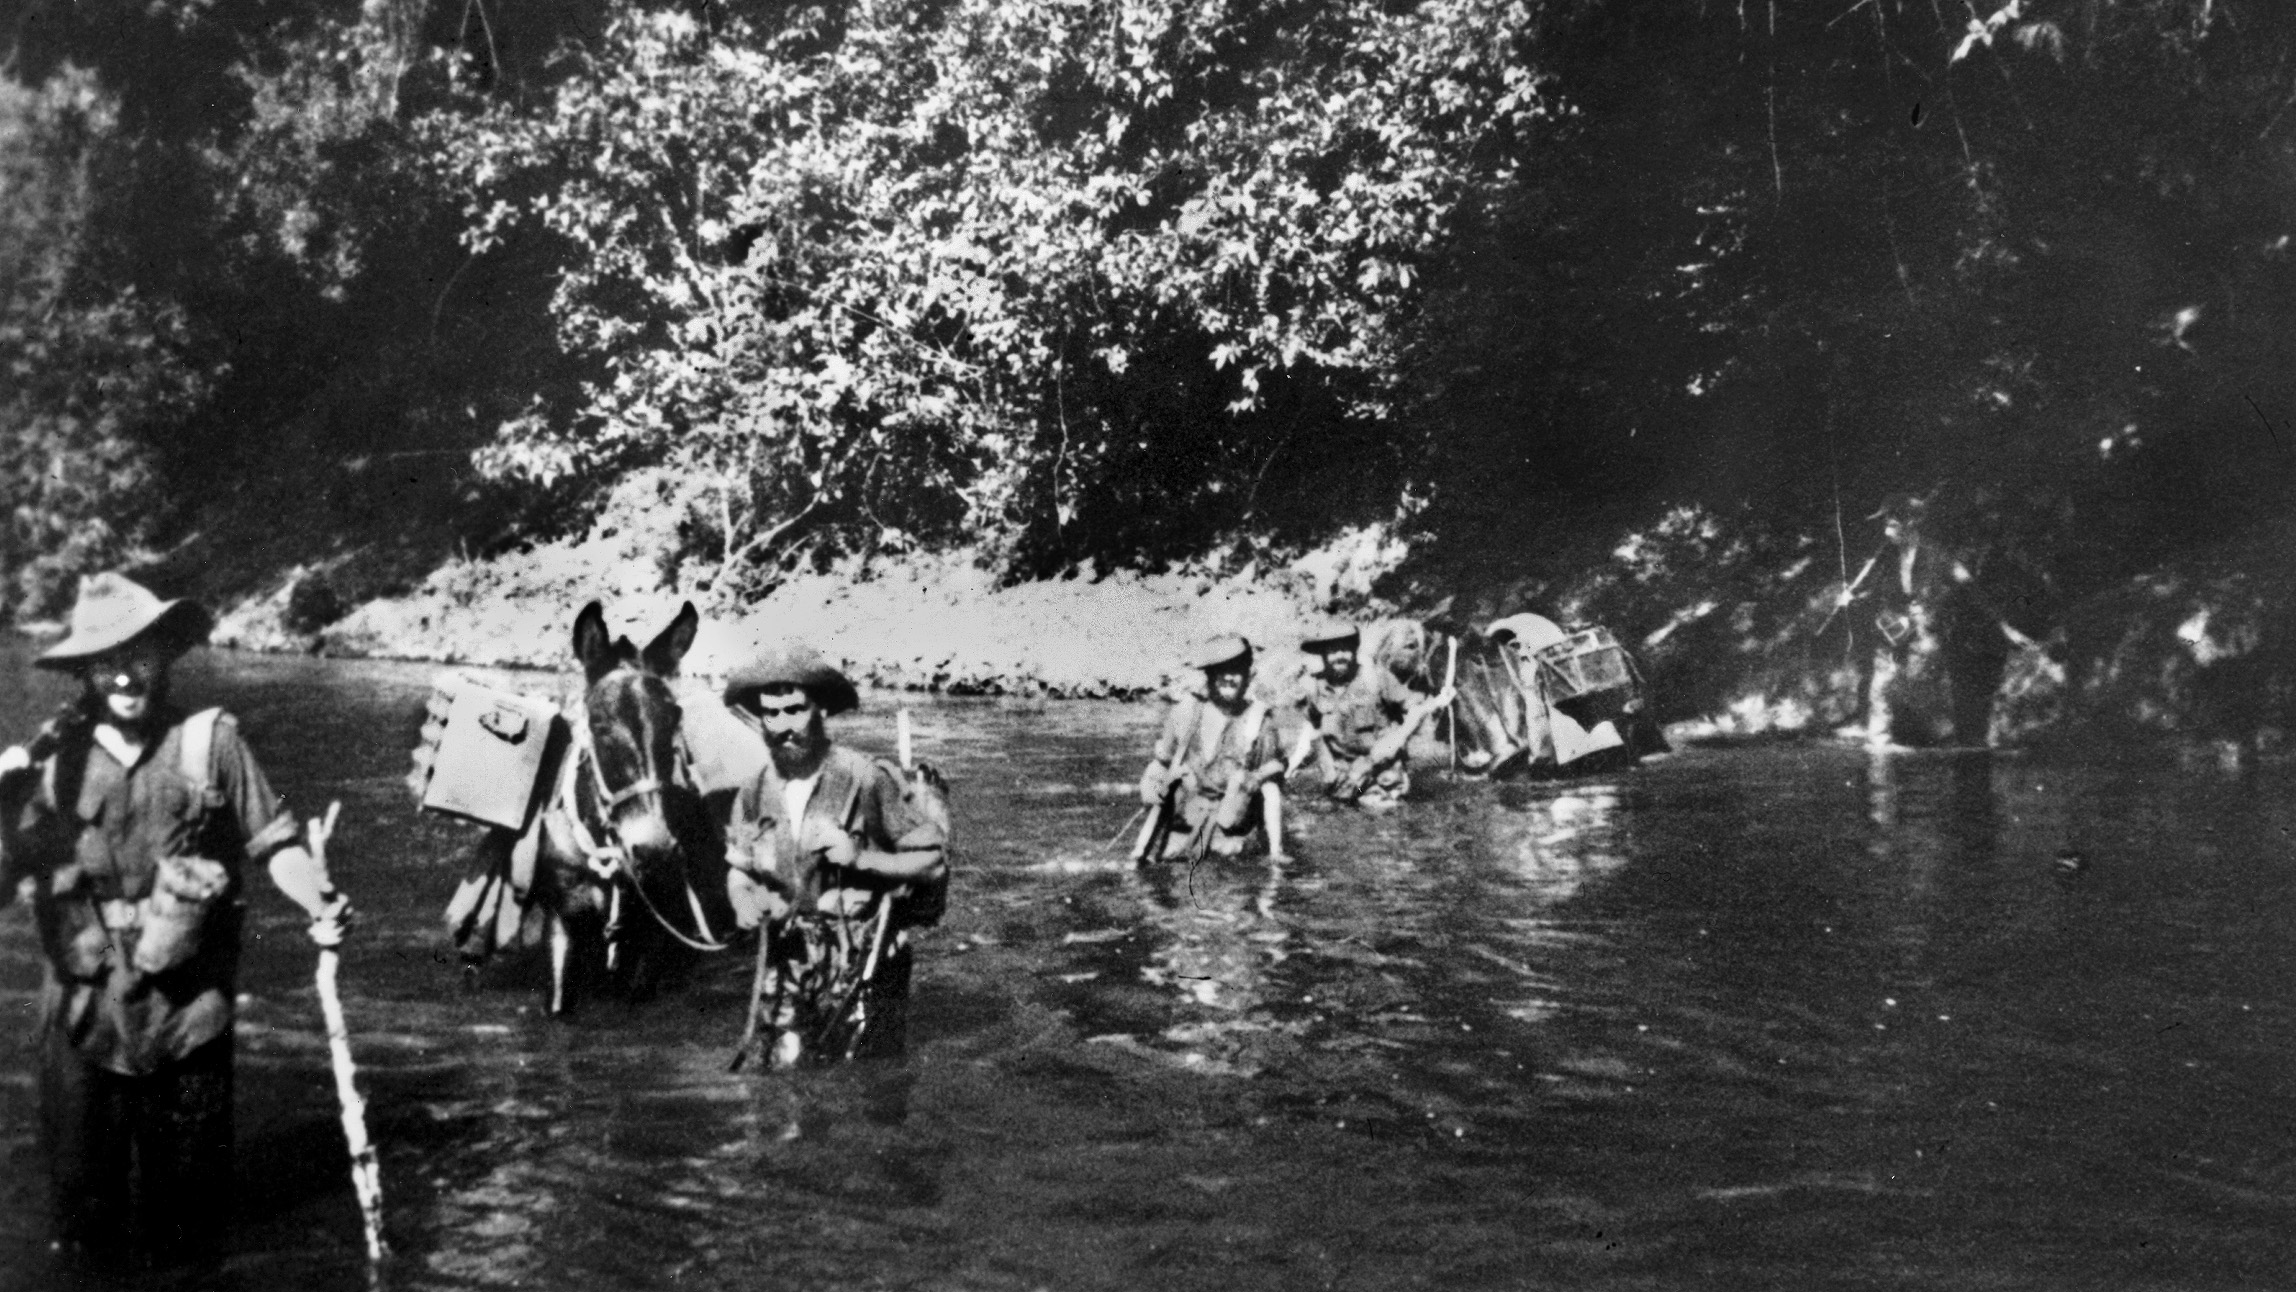 A group of the famed Chindits, commanded by eccentric Brigadier Orde Wingate, ford a stream with their pack animals somewhere in Burma.